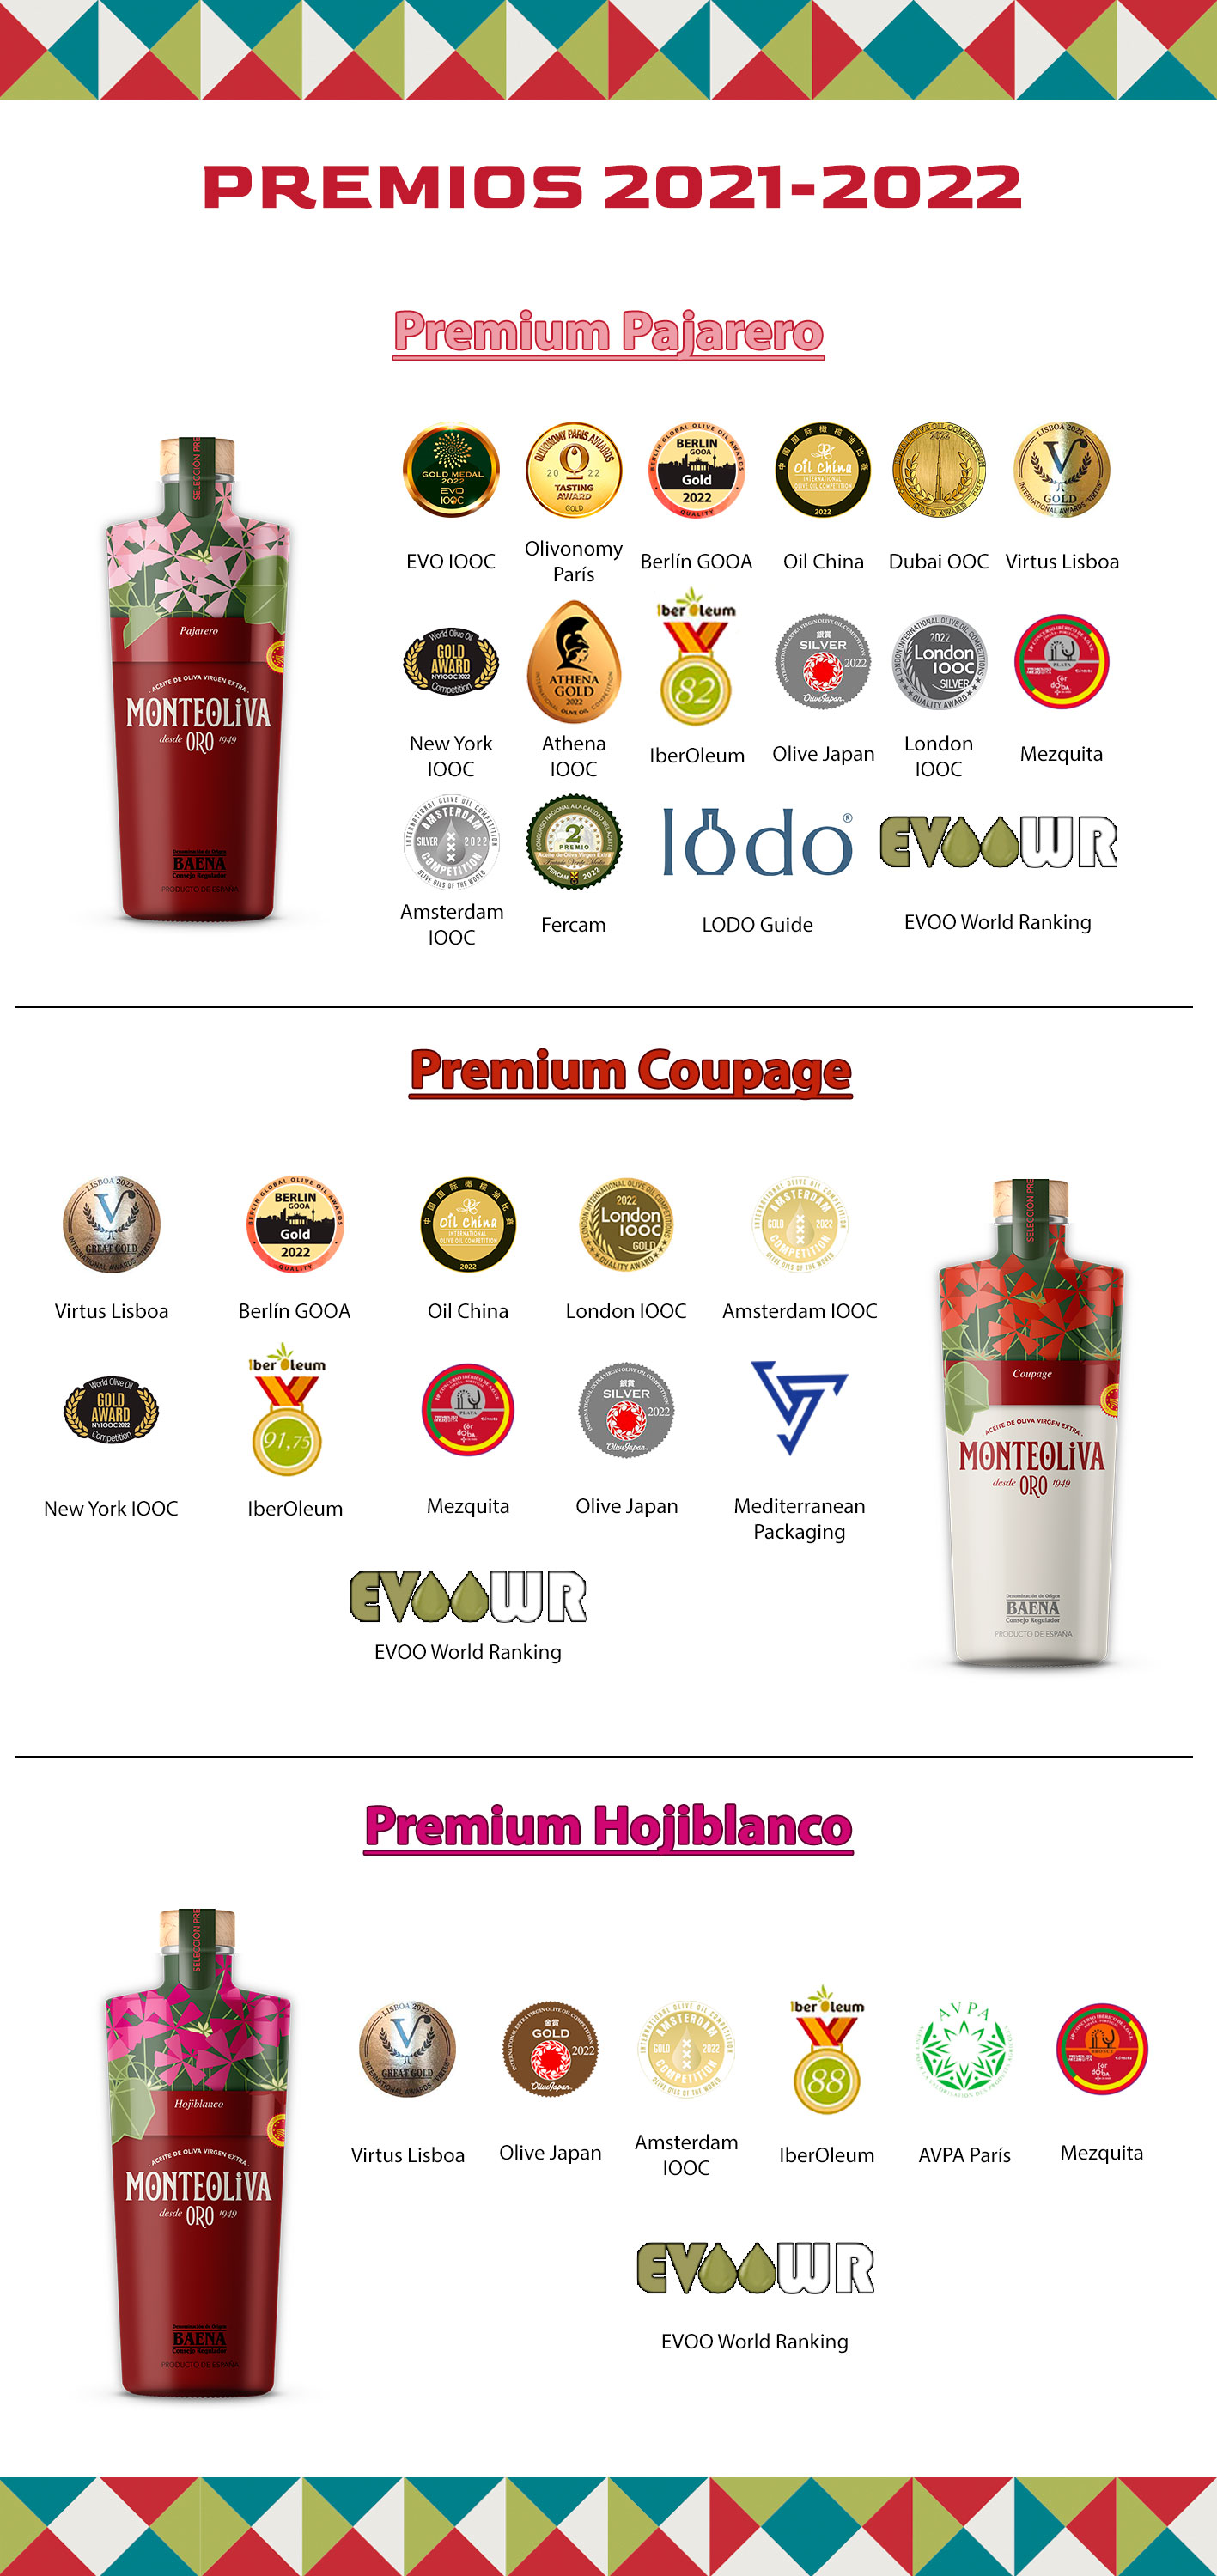 Awards received by Monteoliva oils in 2022 - 2